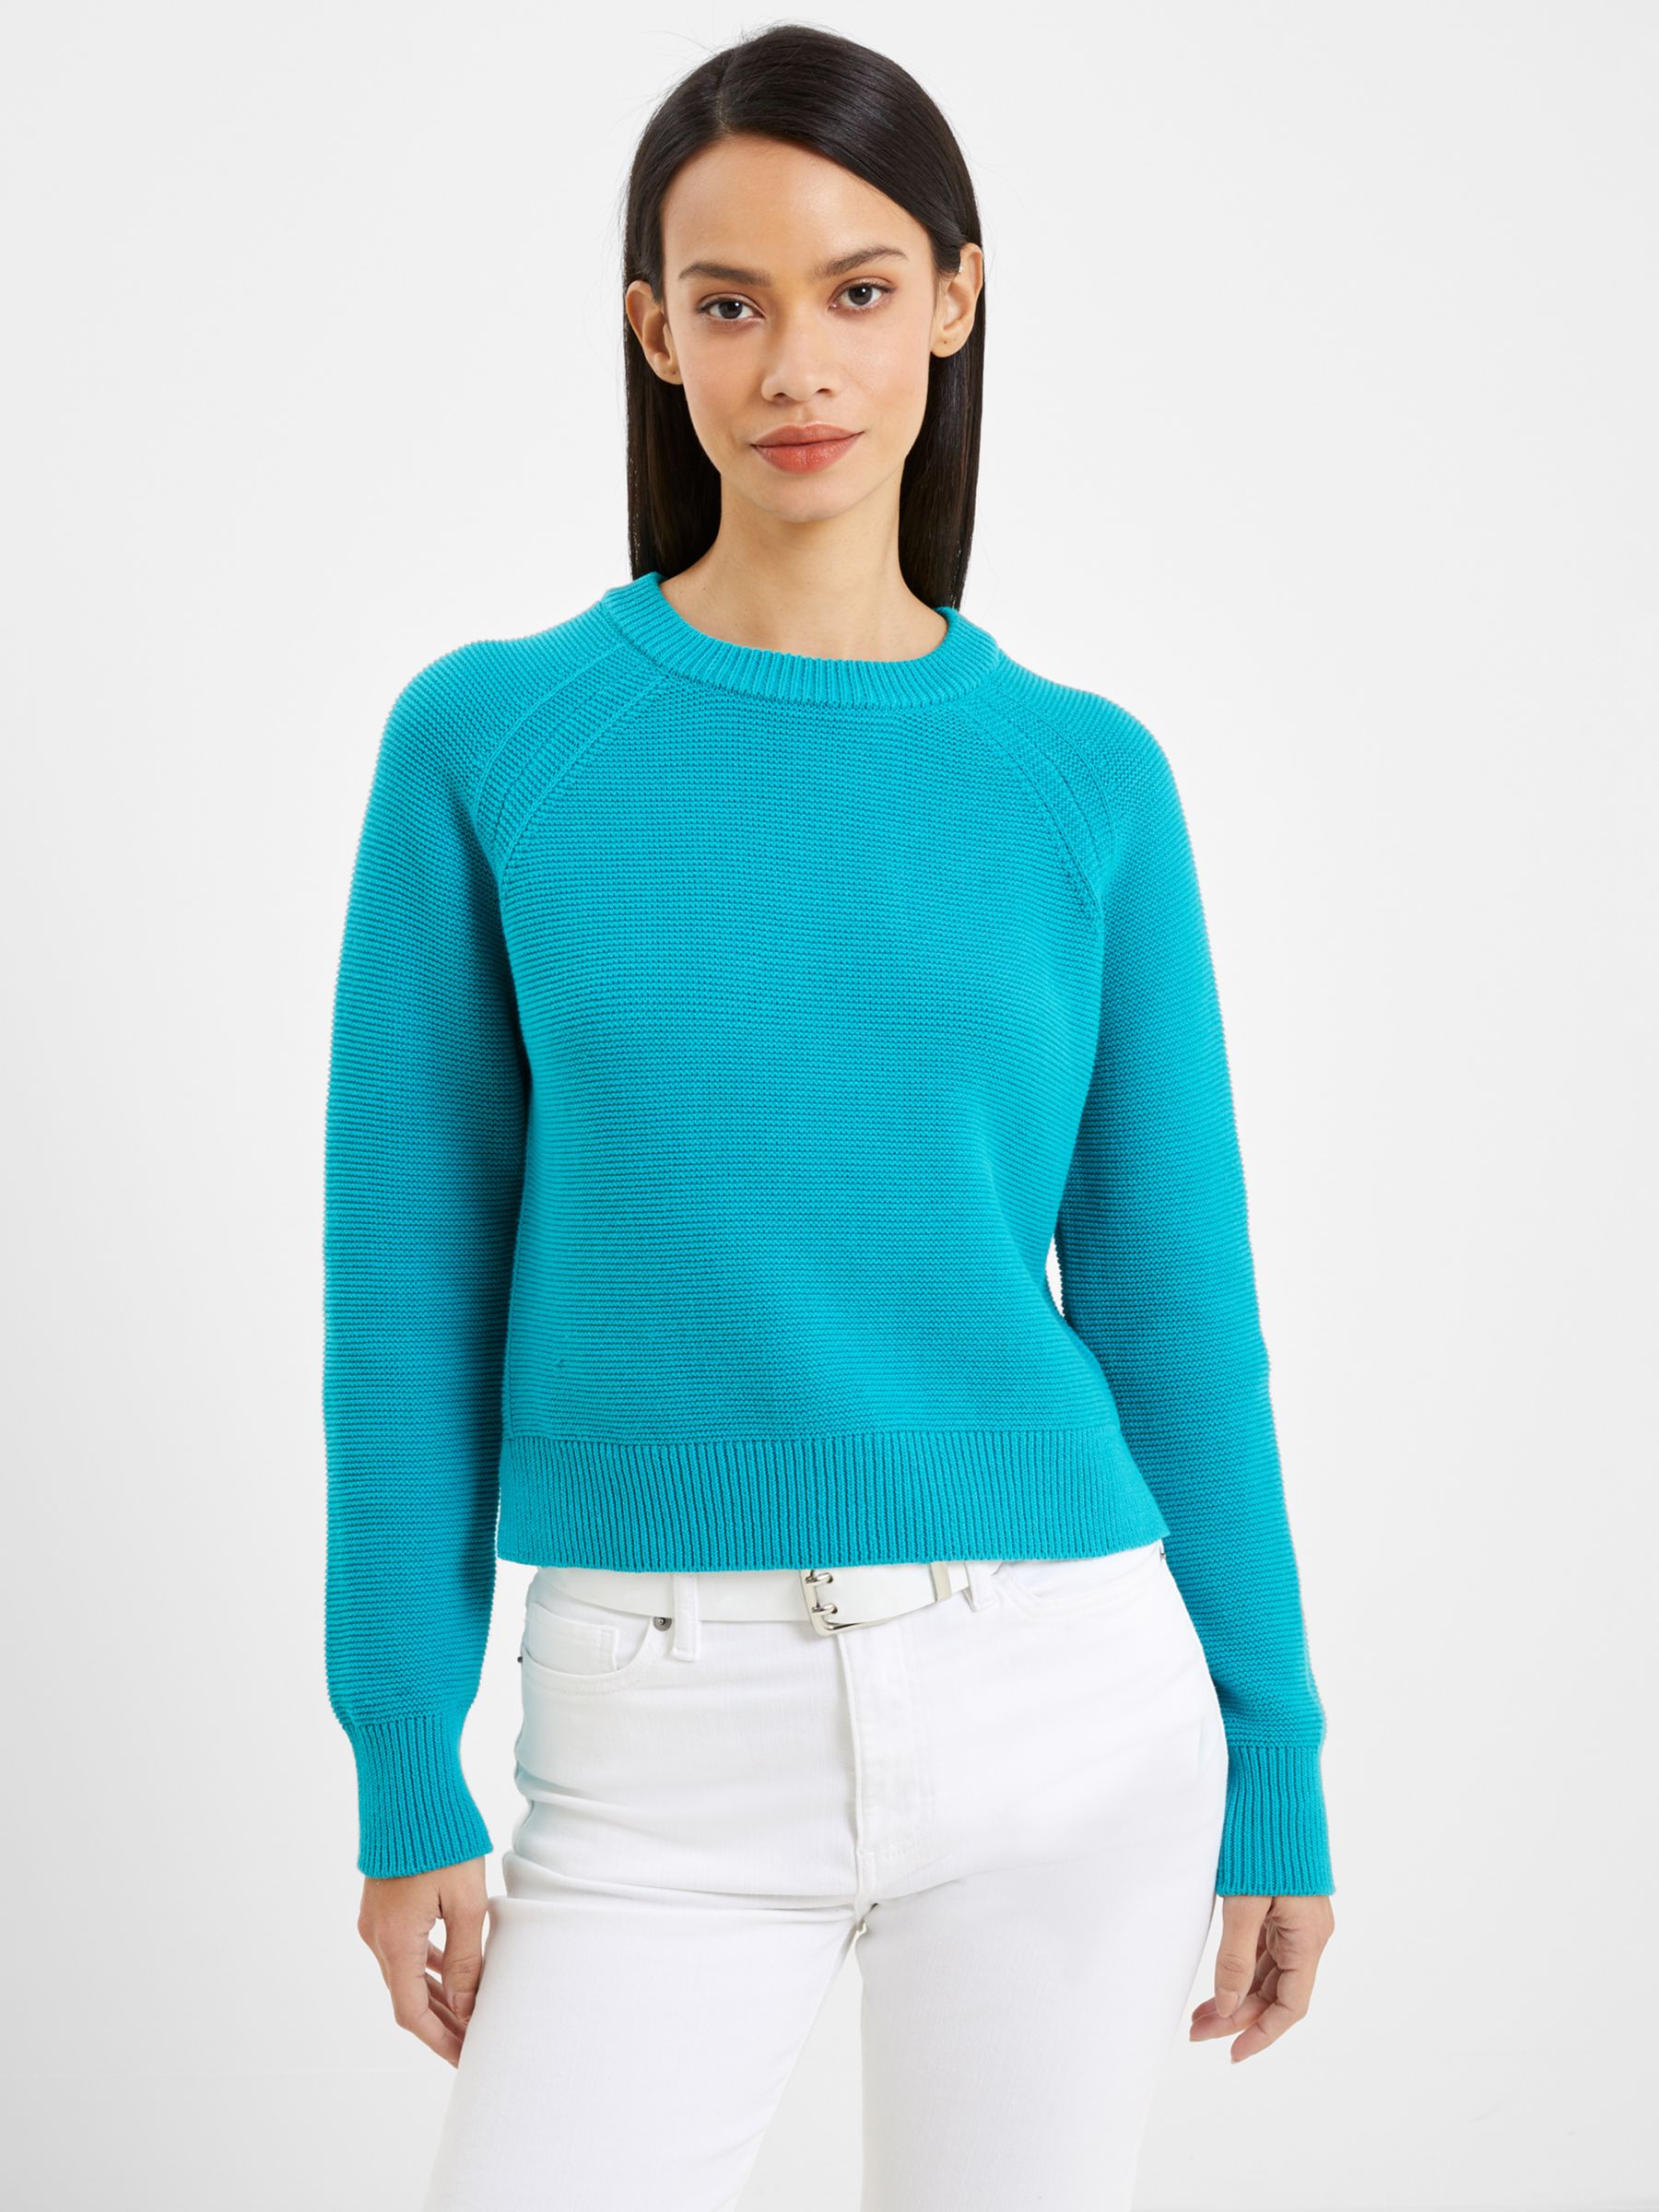 French Connection Lilly Crew Jumper, Jaded Teal, XS